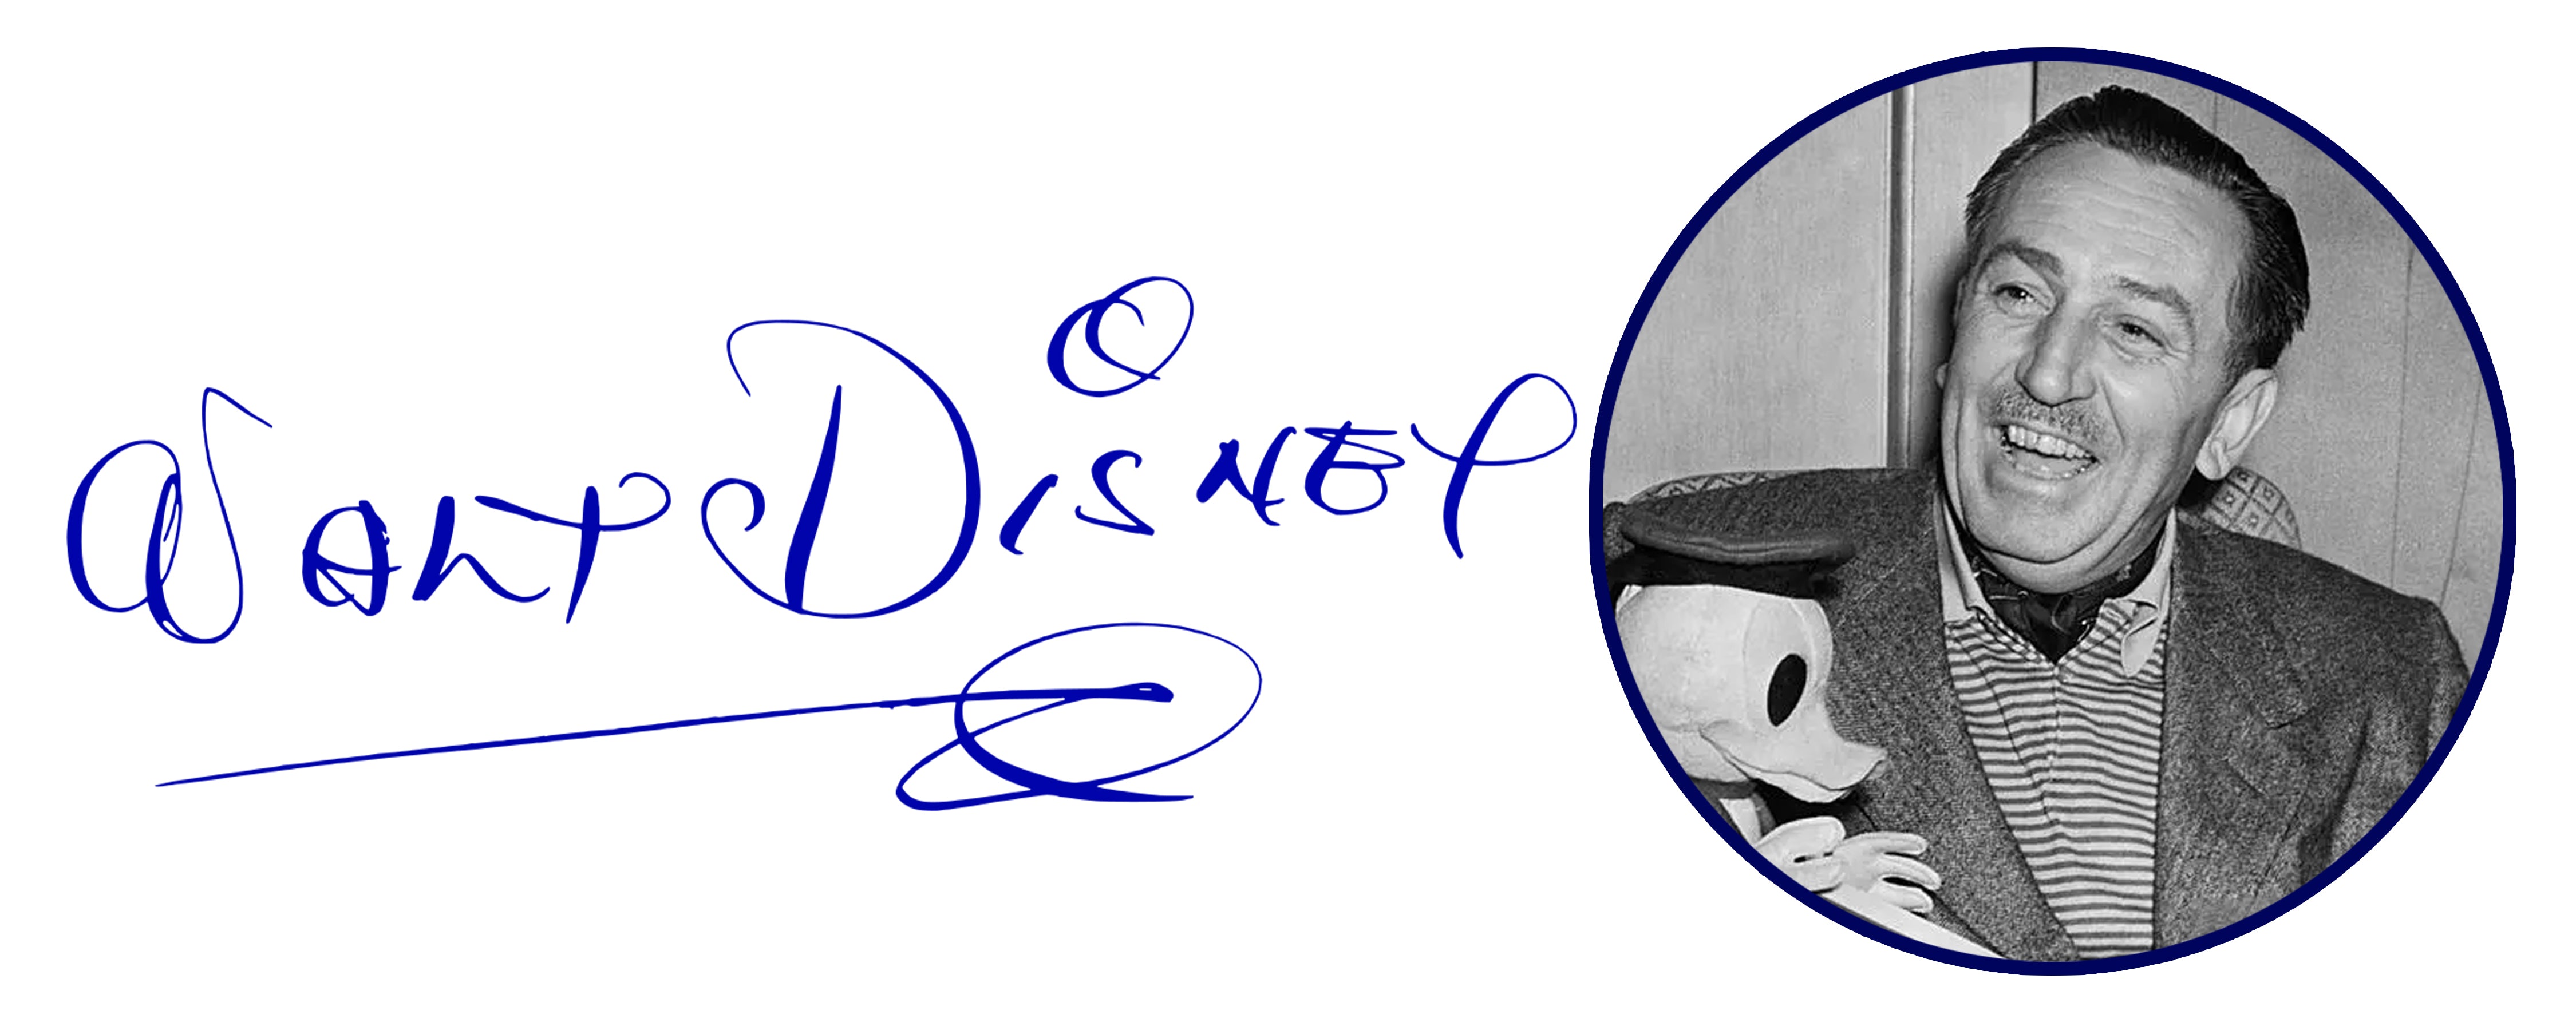 Walt Disney and the magical world he created for generations need no introduction. And as you'll see, even his signature is reminiscent of what he created. The curly, cursive lines are proof of a high level of artistry and imagination. It's almost as if in every stroke, there's an idea about to burst out!